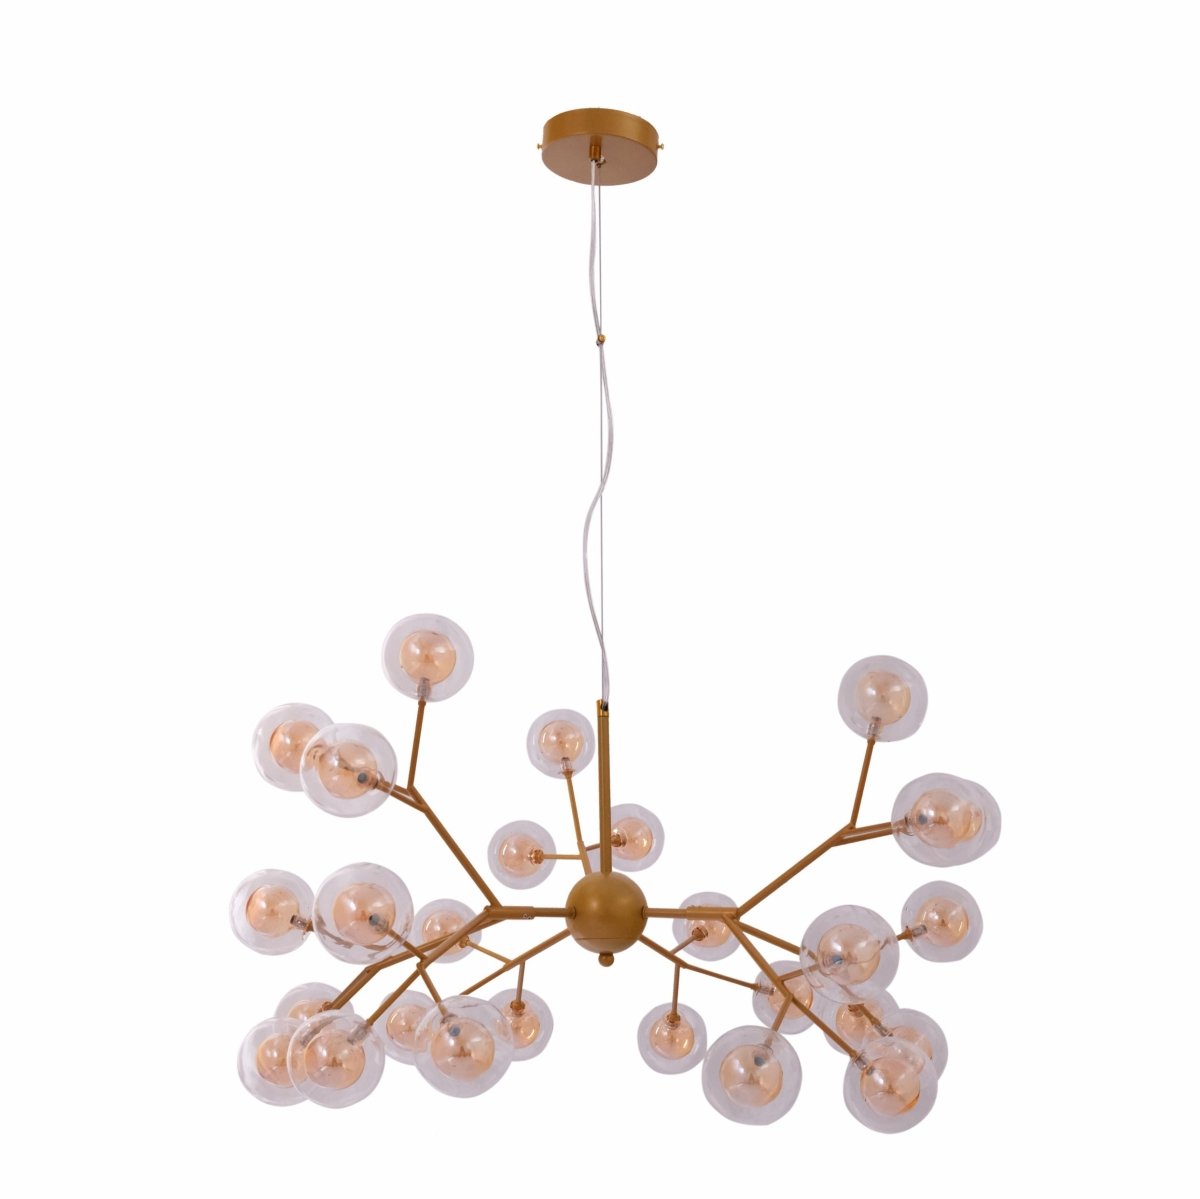 Main image of Neuron Model Gold and Amber Chandelier with 27xG4 Fittings | TEKLED 158-19616